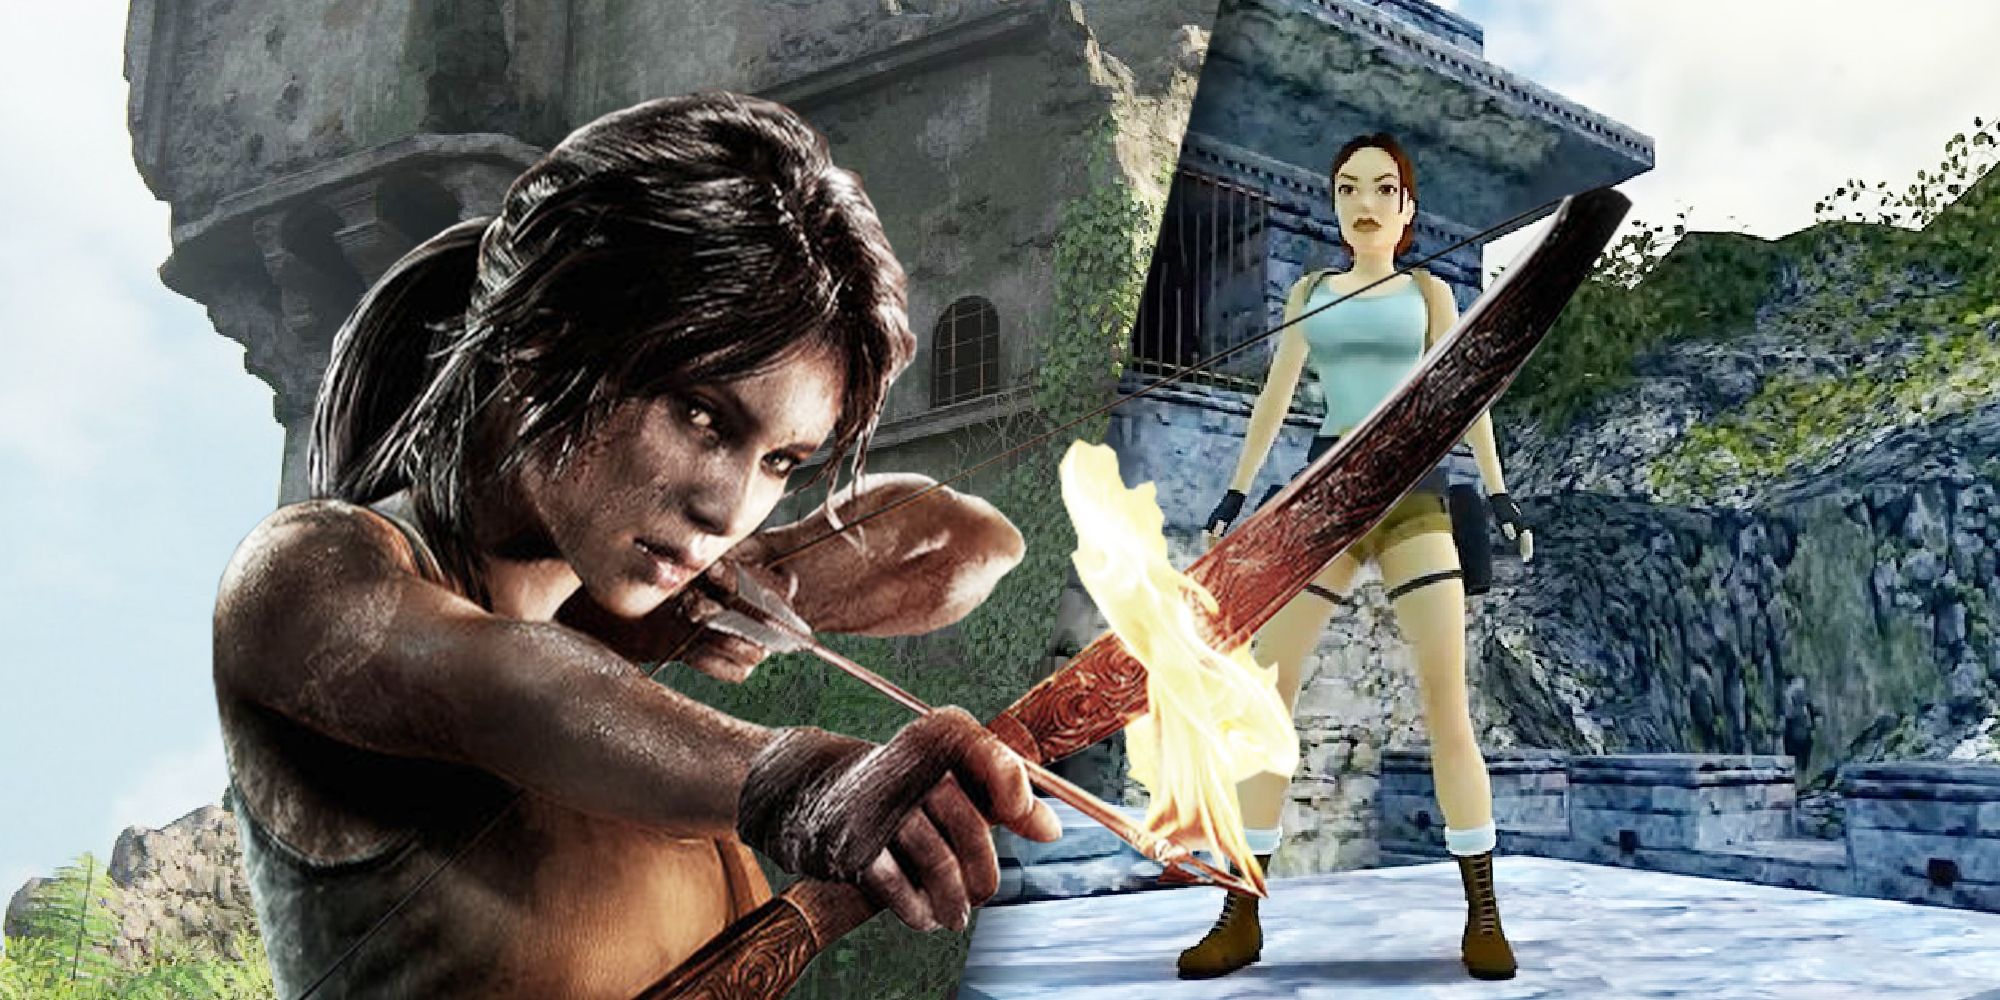 Why I'm excited to earn those Tomb Raider I-III Remastered trophies